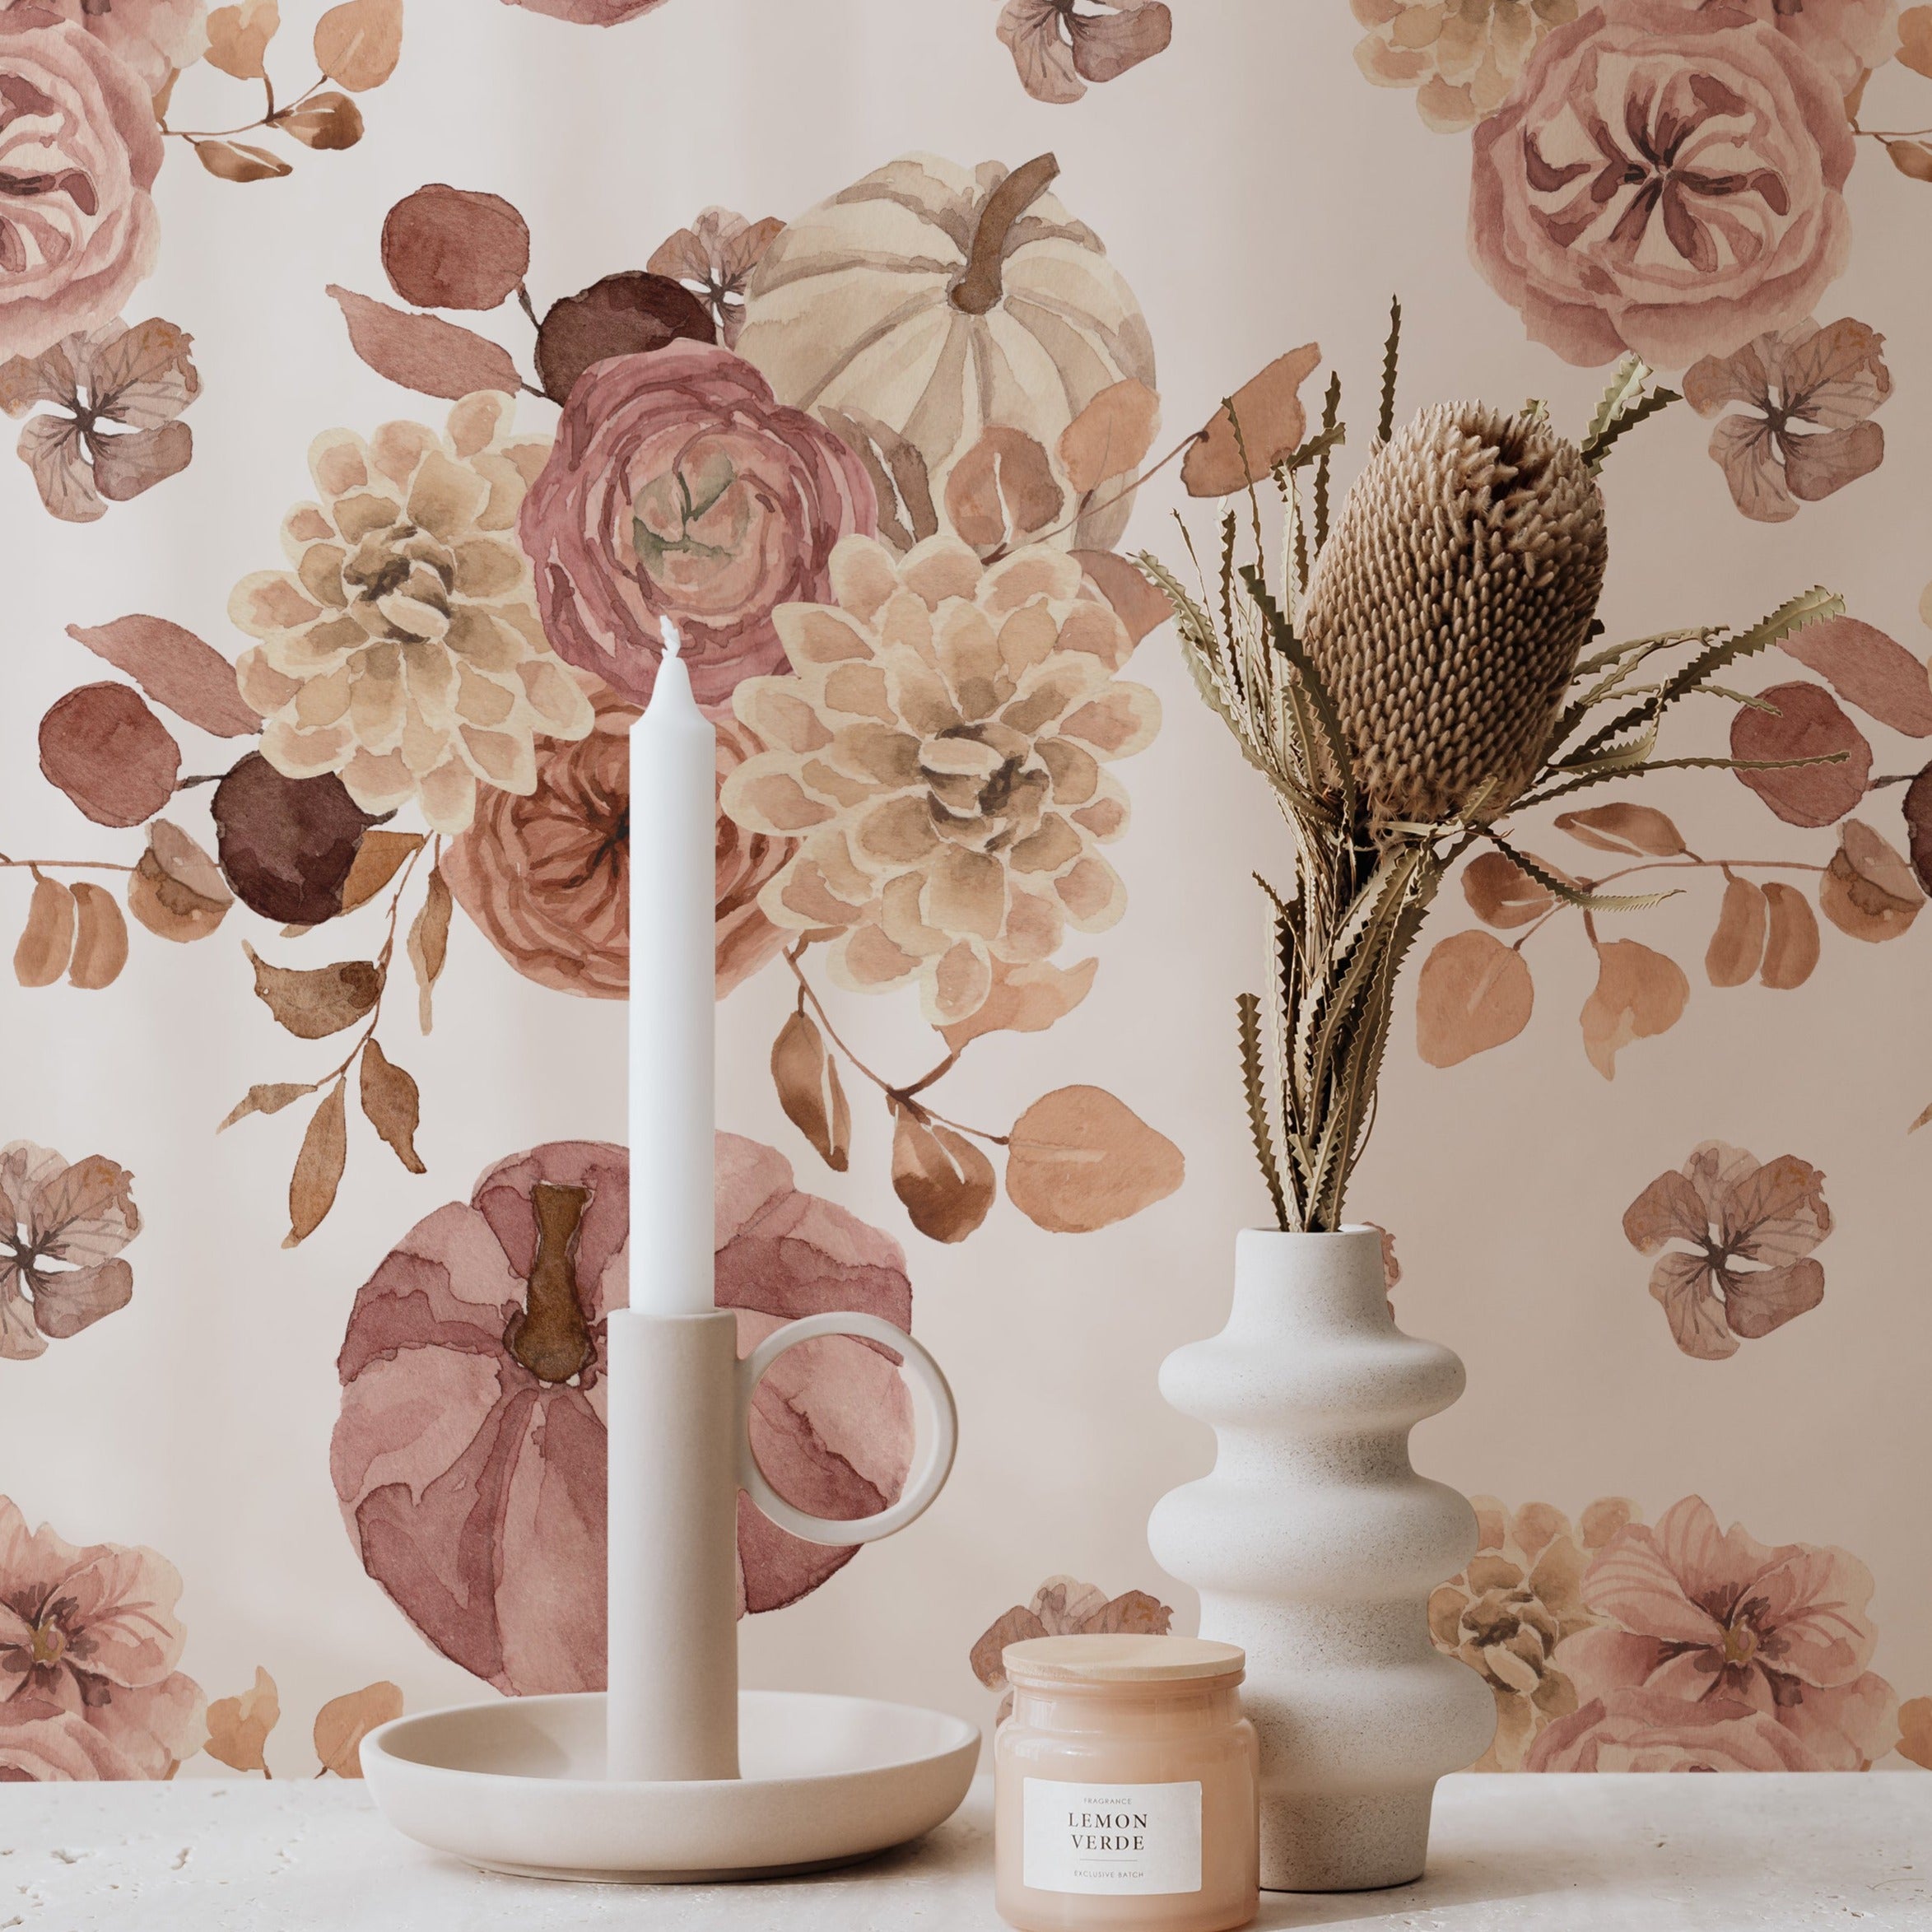 A well-styled corner of a room featuring the Pumpkin Spice Wallpaper as a backdrop. A simple modern decor includes a white candle in a tall ceramic holder, a dish with a candle, and a vase with dried botanicals, all set against the floral wallpaper that exudes a warm, inviting autumn vibe.